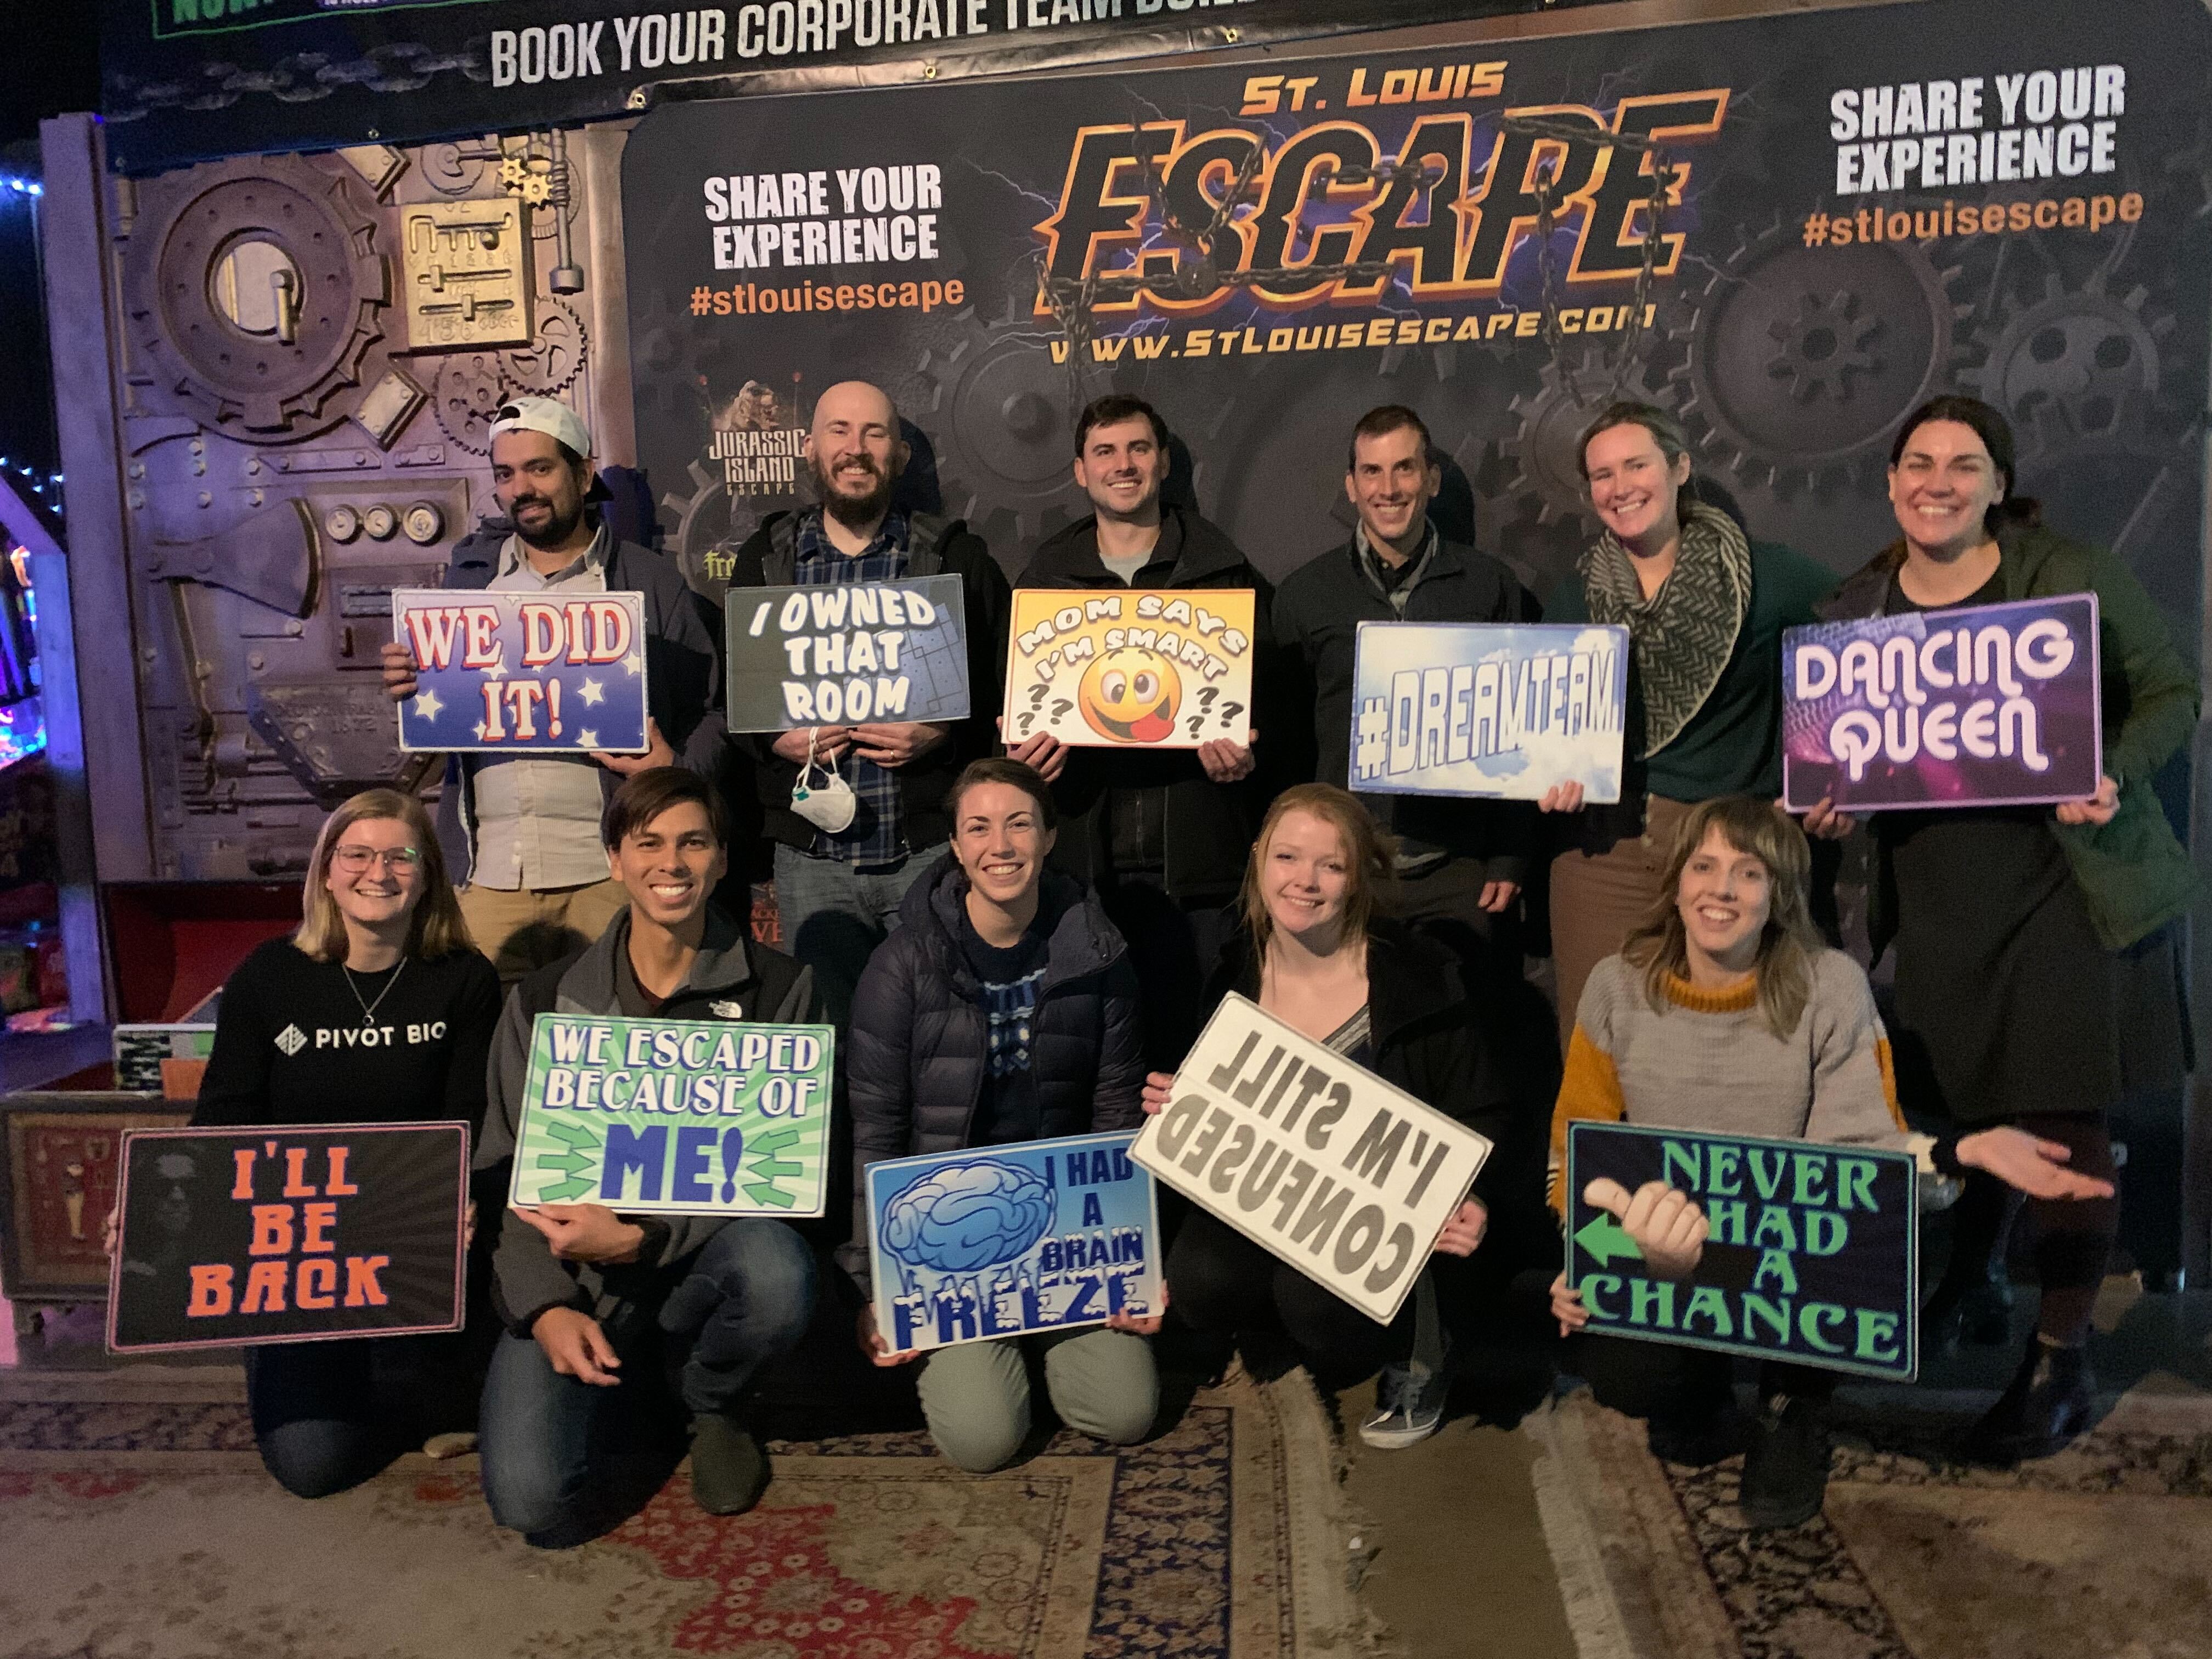 Maddi King poses for a group photo with coworkers after going through an escape room